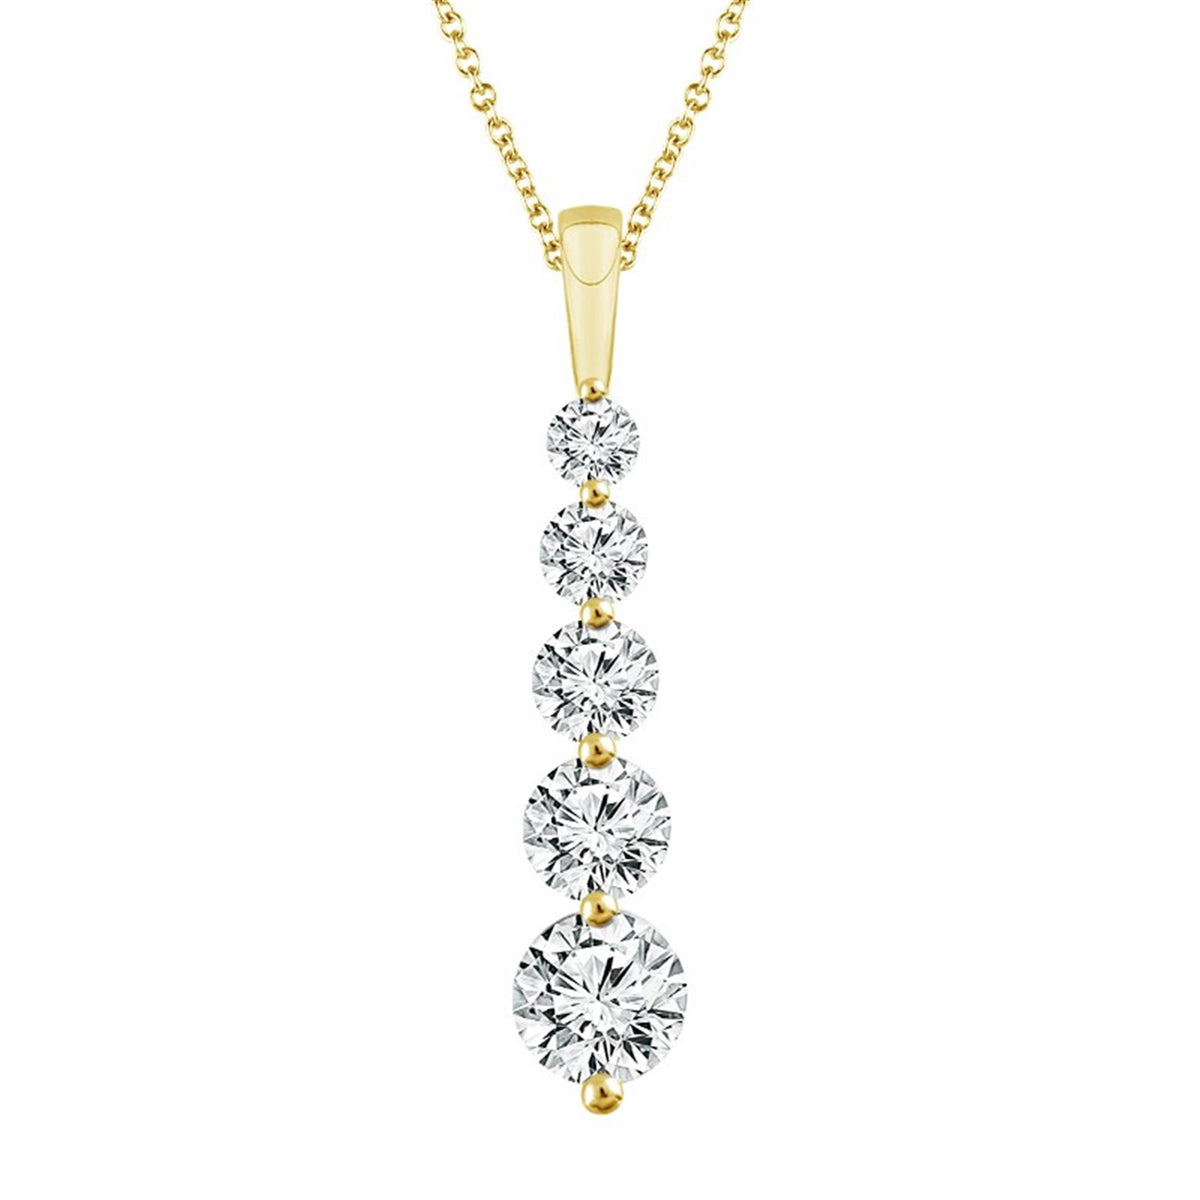 14Kt Yellow Gold Journey Pendant With 1.50cttw Natural Diamonds